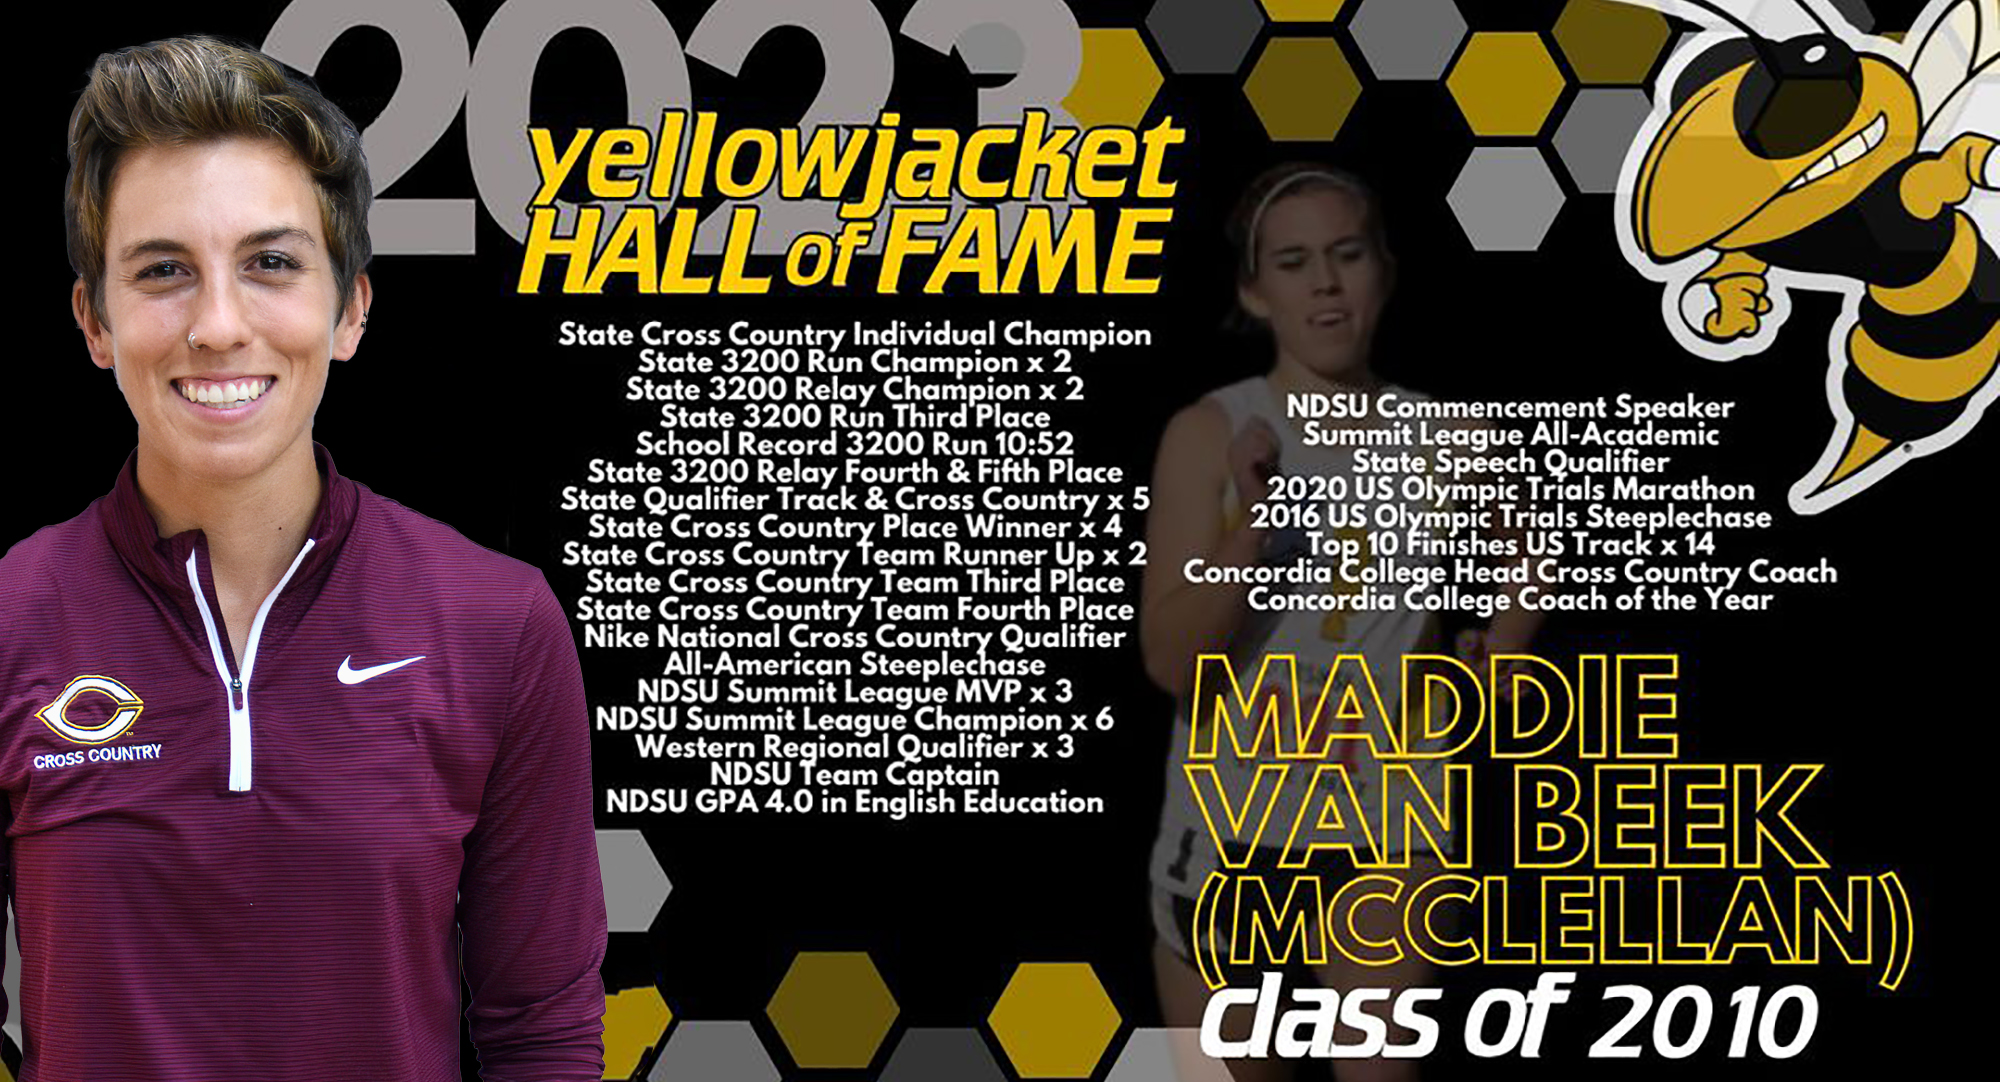 Maddie Van Beek will be inducted into the Perham HS Hall of Fame. She was a state champion in cross country (Photo courtesy of Perham HS)